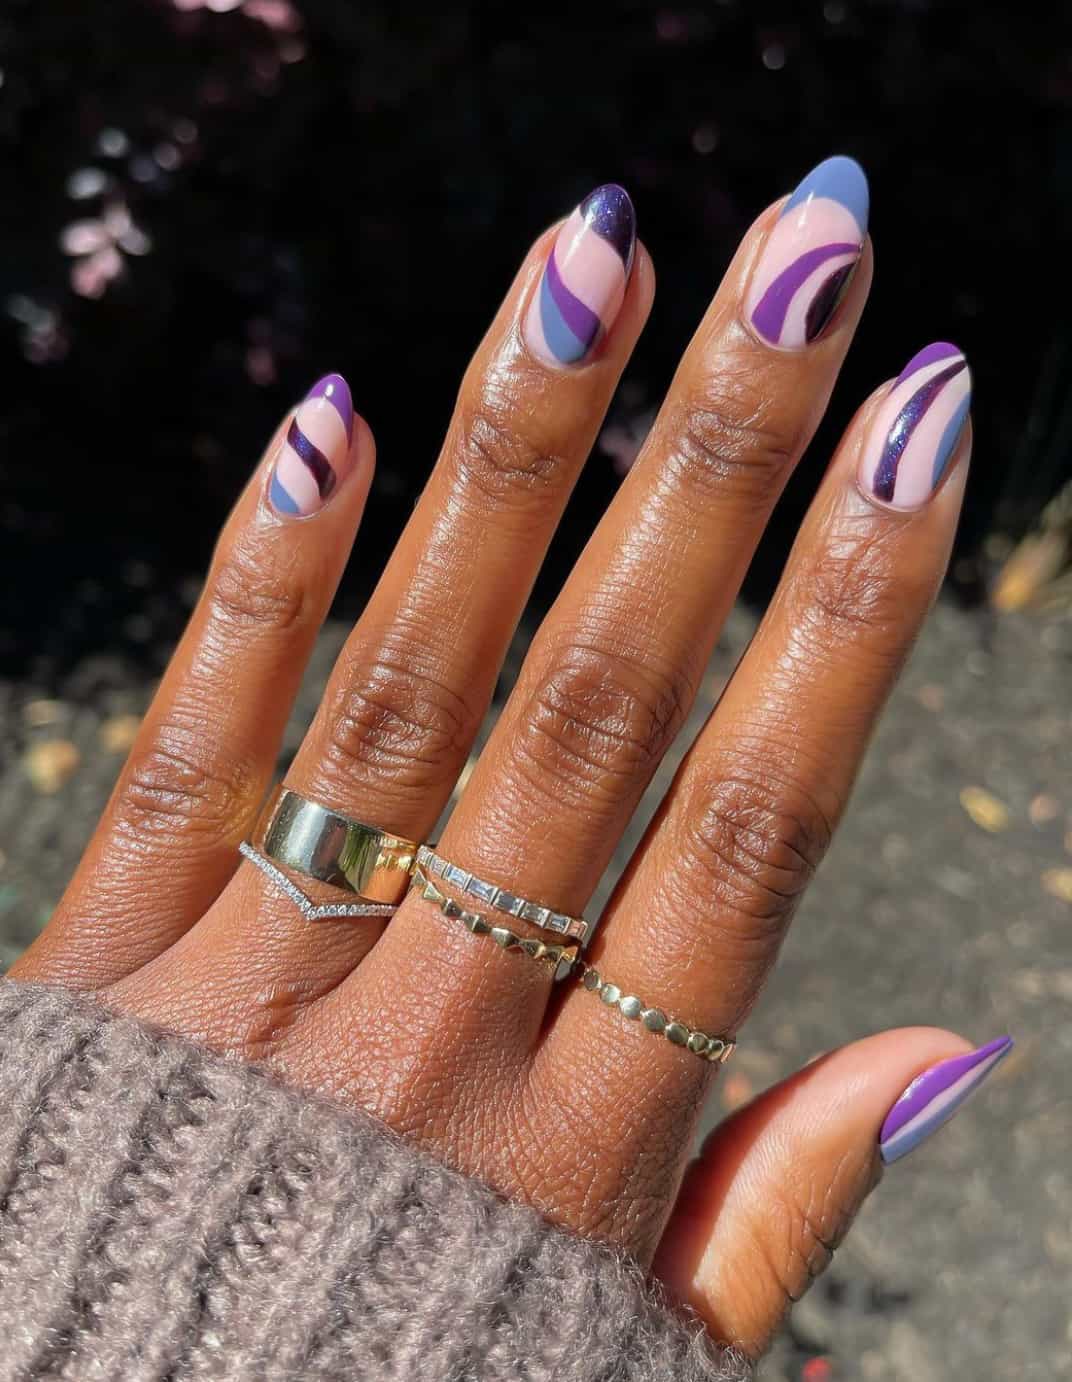 A hand with medium length round nails with a nude pink base and swirls in multiple shades of purple